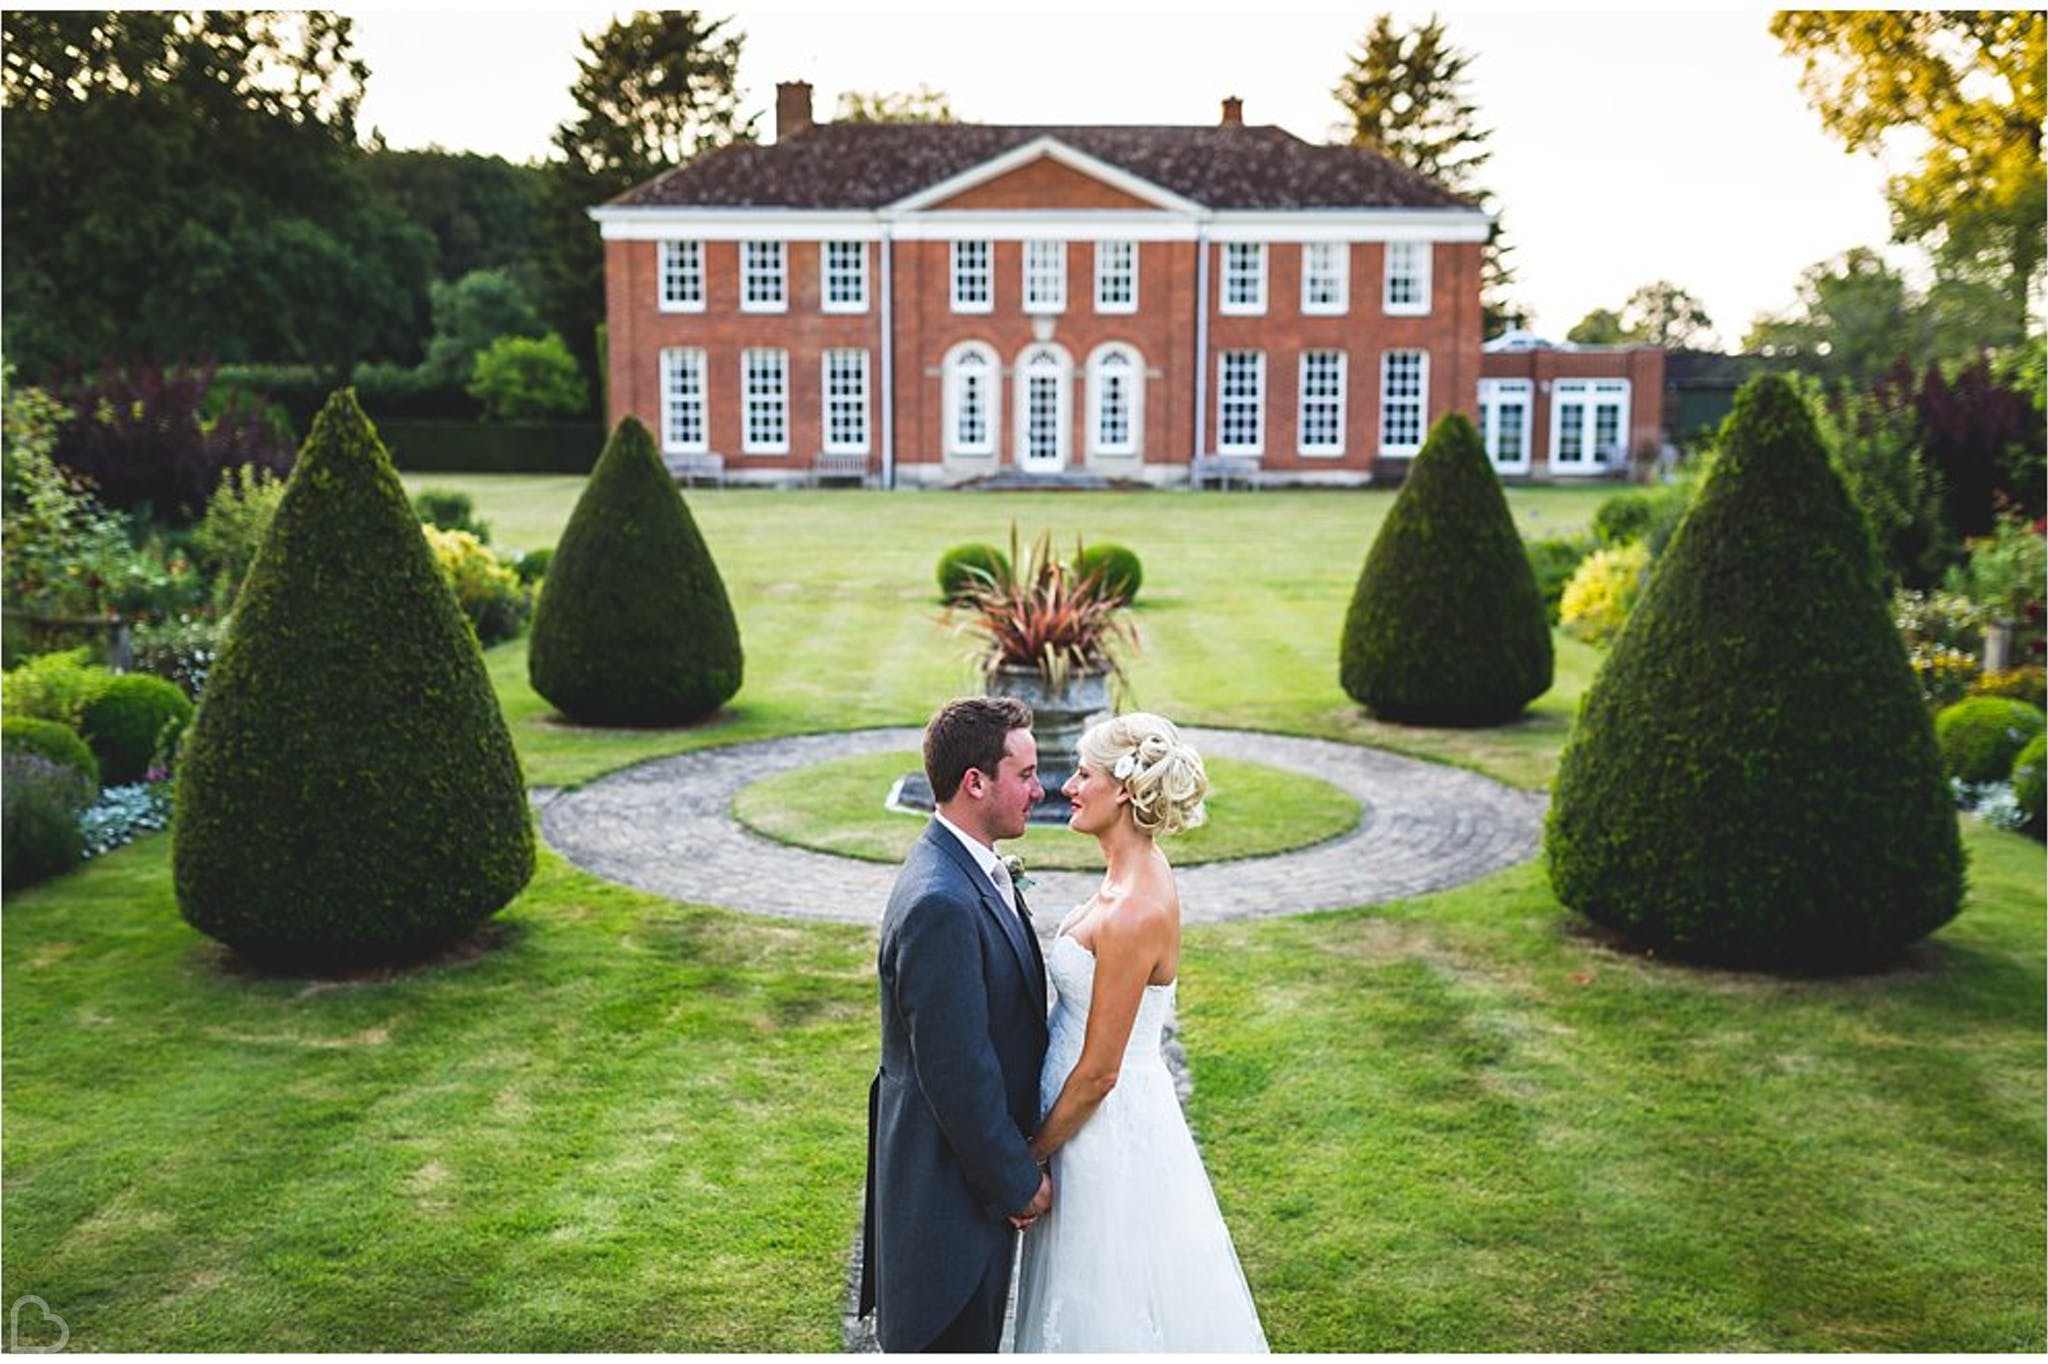 newlyweds pose in front of hockering house a country wedding venue in the uk 